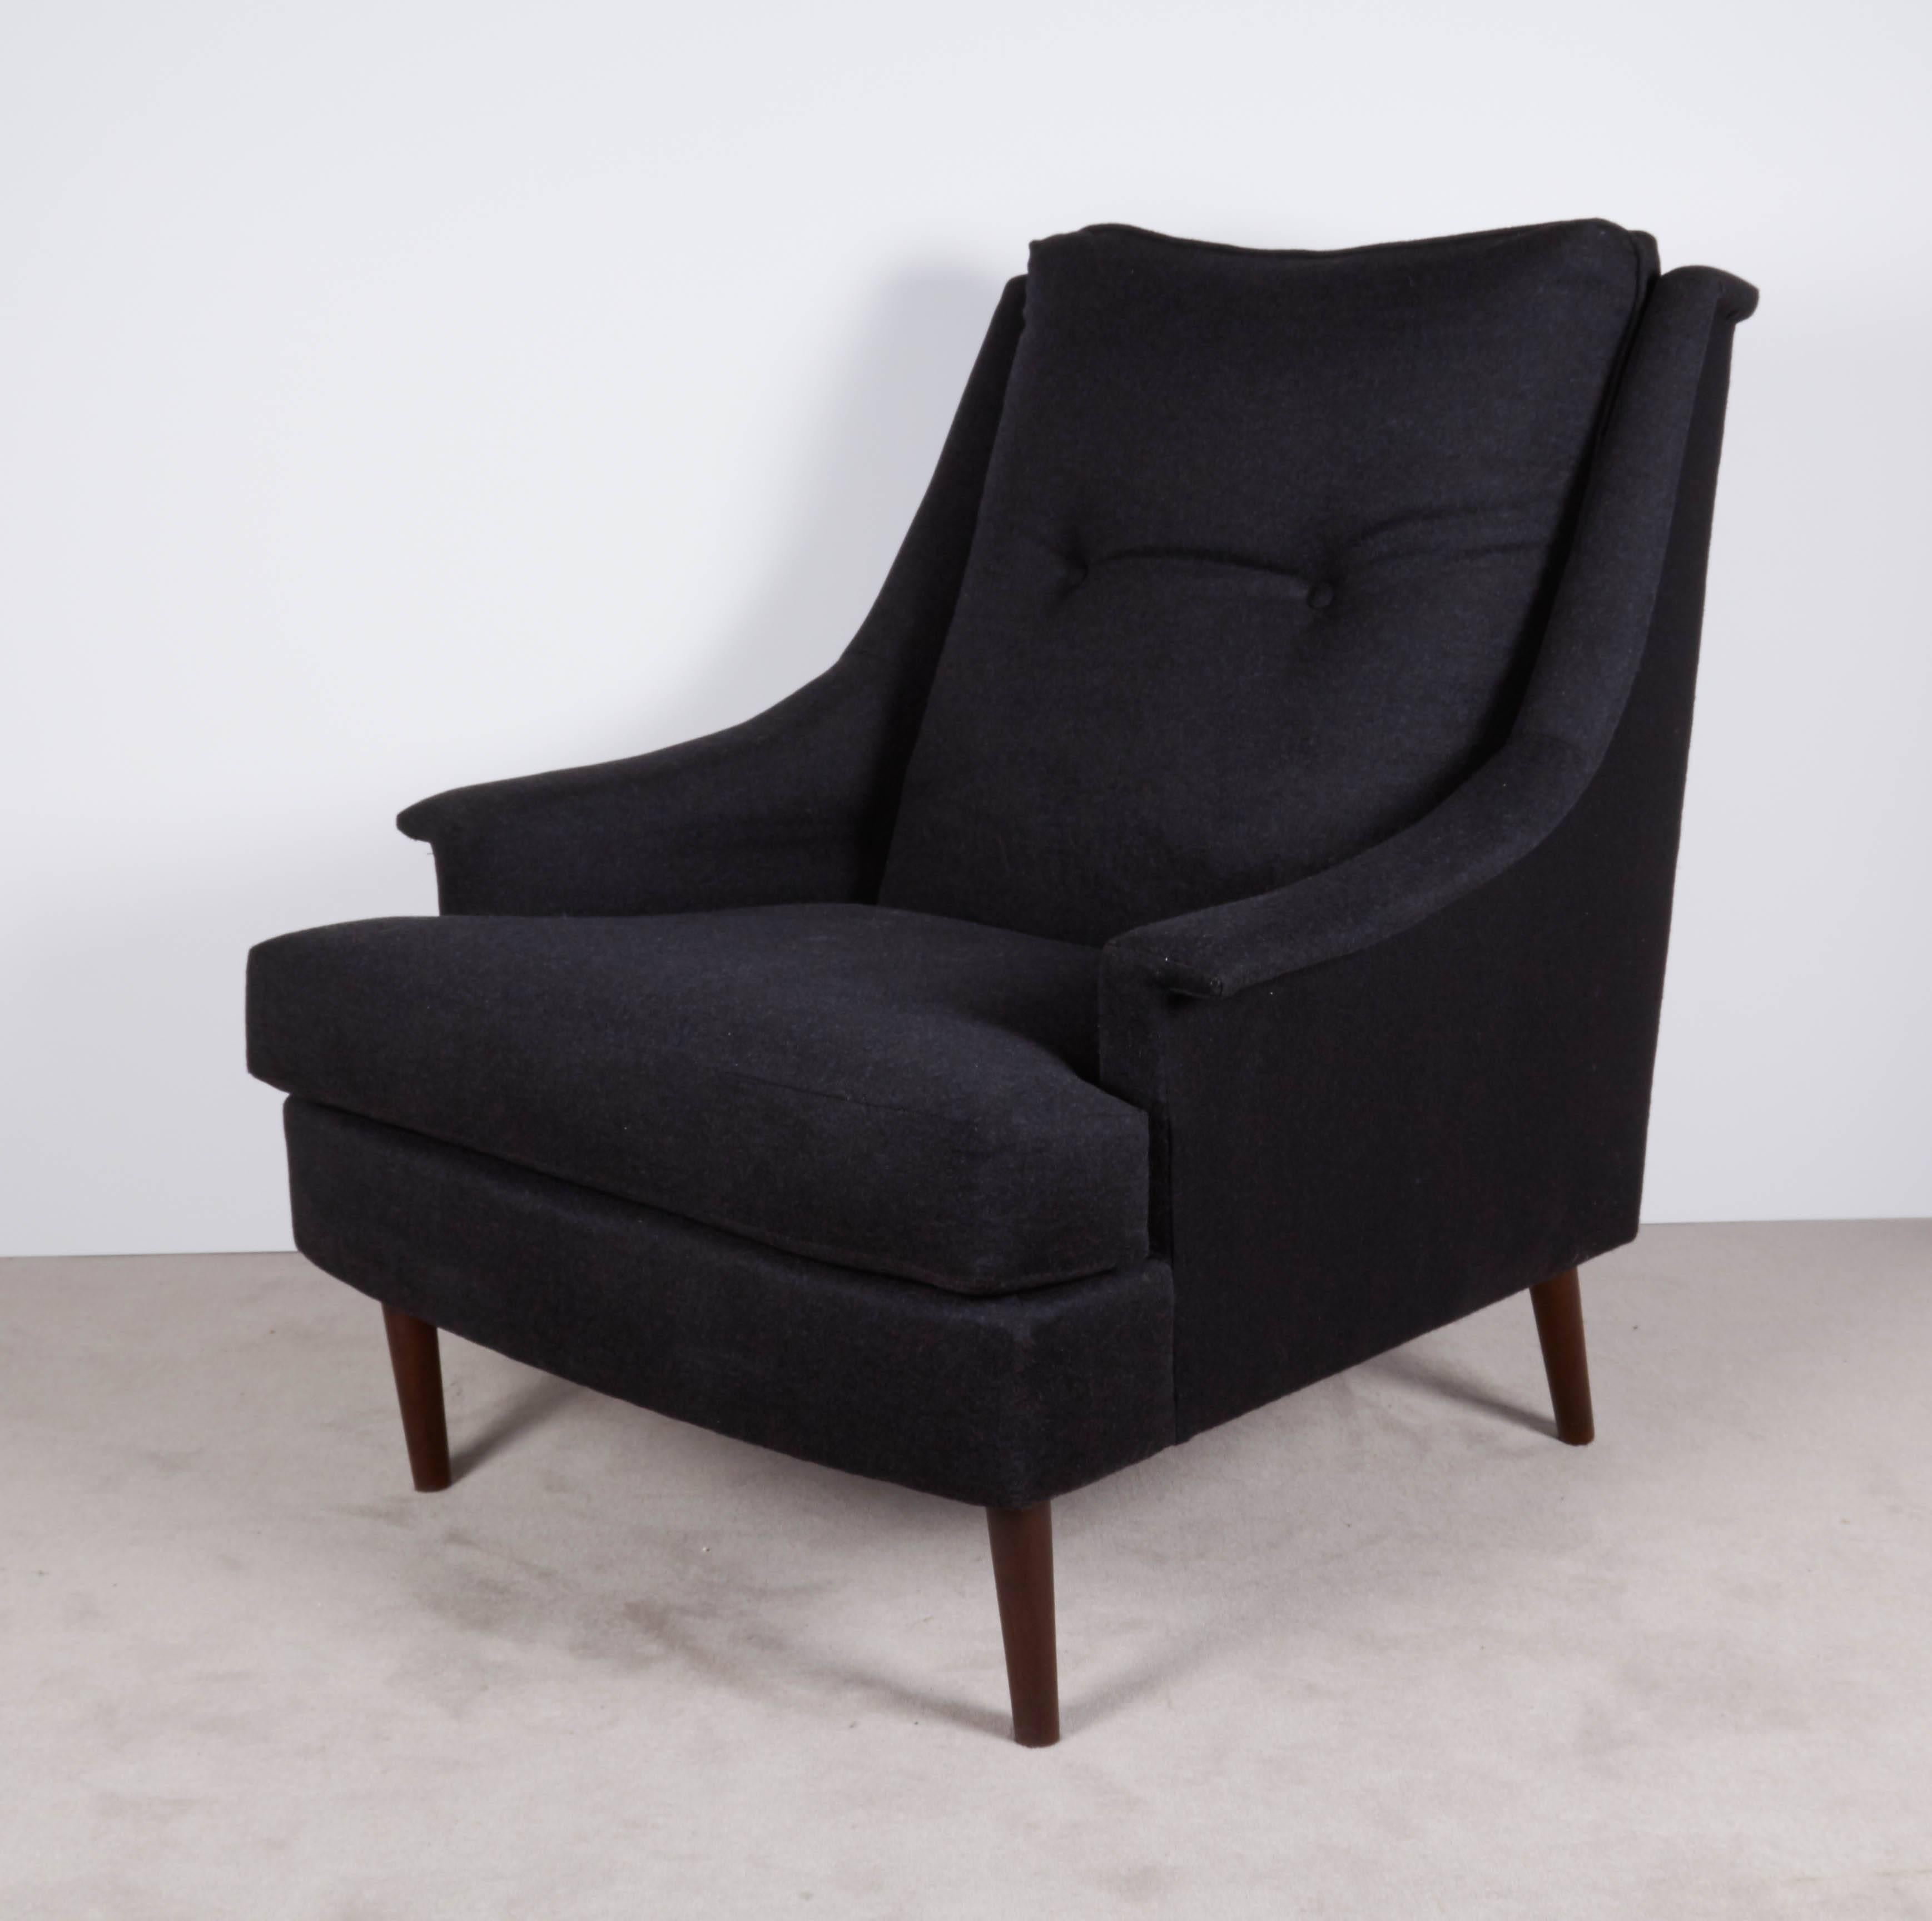 This elegant Mid-Century lounge chair, produced circa 1950s in the style of designer Adrian Pearsall, comes beautifully upholstered in dark grey flannel wool, with tufted back and wing arms, on round slanted wood legs. Excellent condition, minuscule